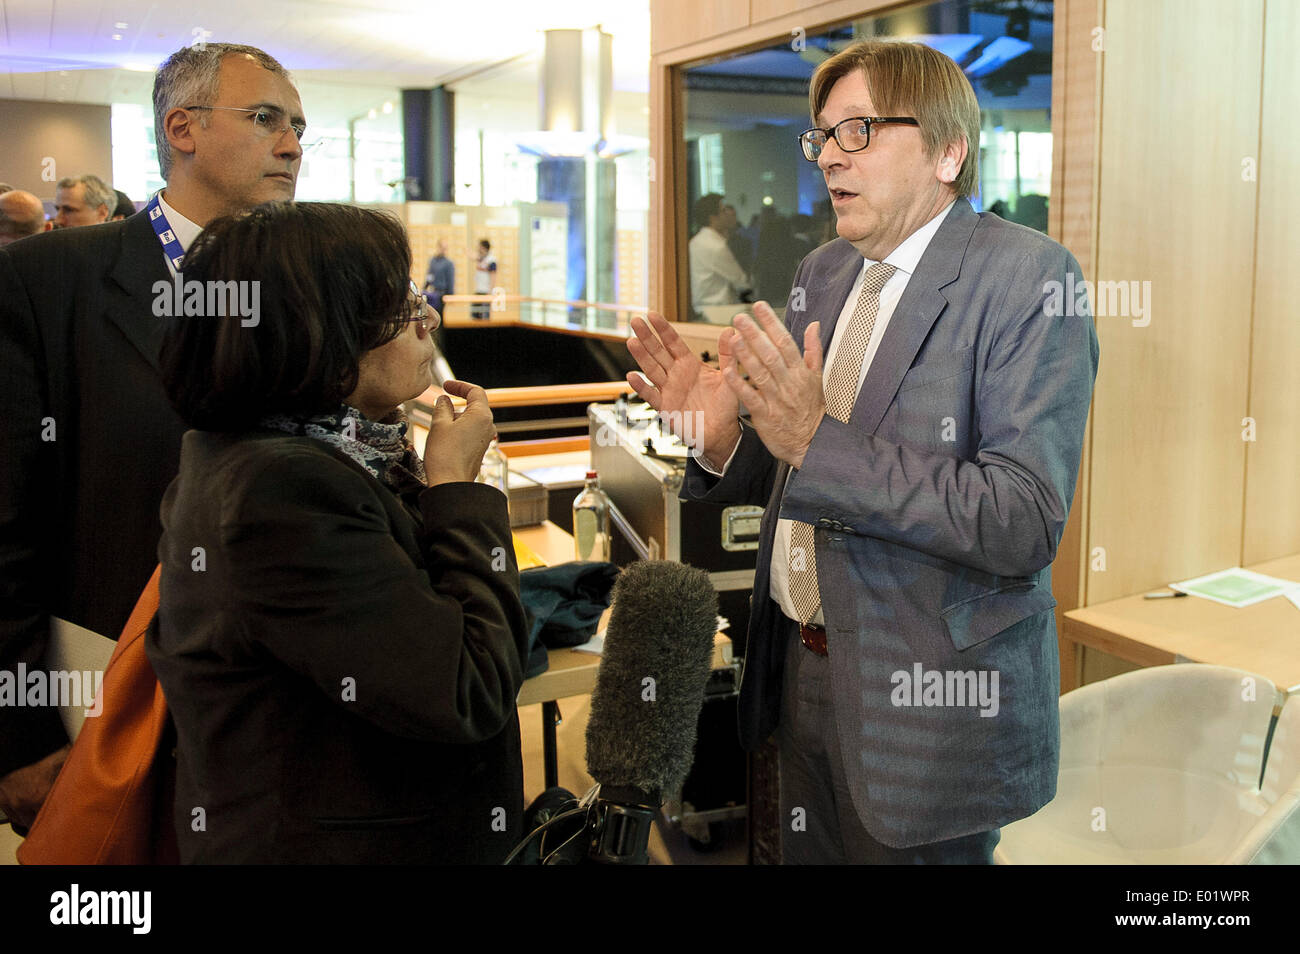 Brussels, Belgium. 29th April 2014. Guy Verhofstadt, top candidate of Liberals (ALDE) talks to the press ahead of Euranet's 'Big Crunch' Presidential debate at the EU parliament in BrusselsThe four top candidates for the presidency of the European Commission - Jean-Claude Juncker, Ska Keller, Martin Schulz and Guy Verhofstadt - attend EU-wide debate organized by EuranetPlus and focused on the major election topics. Credit:  dpa picture alliance/Alamy Live News Stock Photo